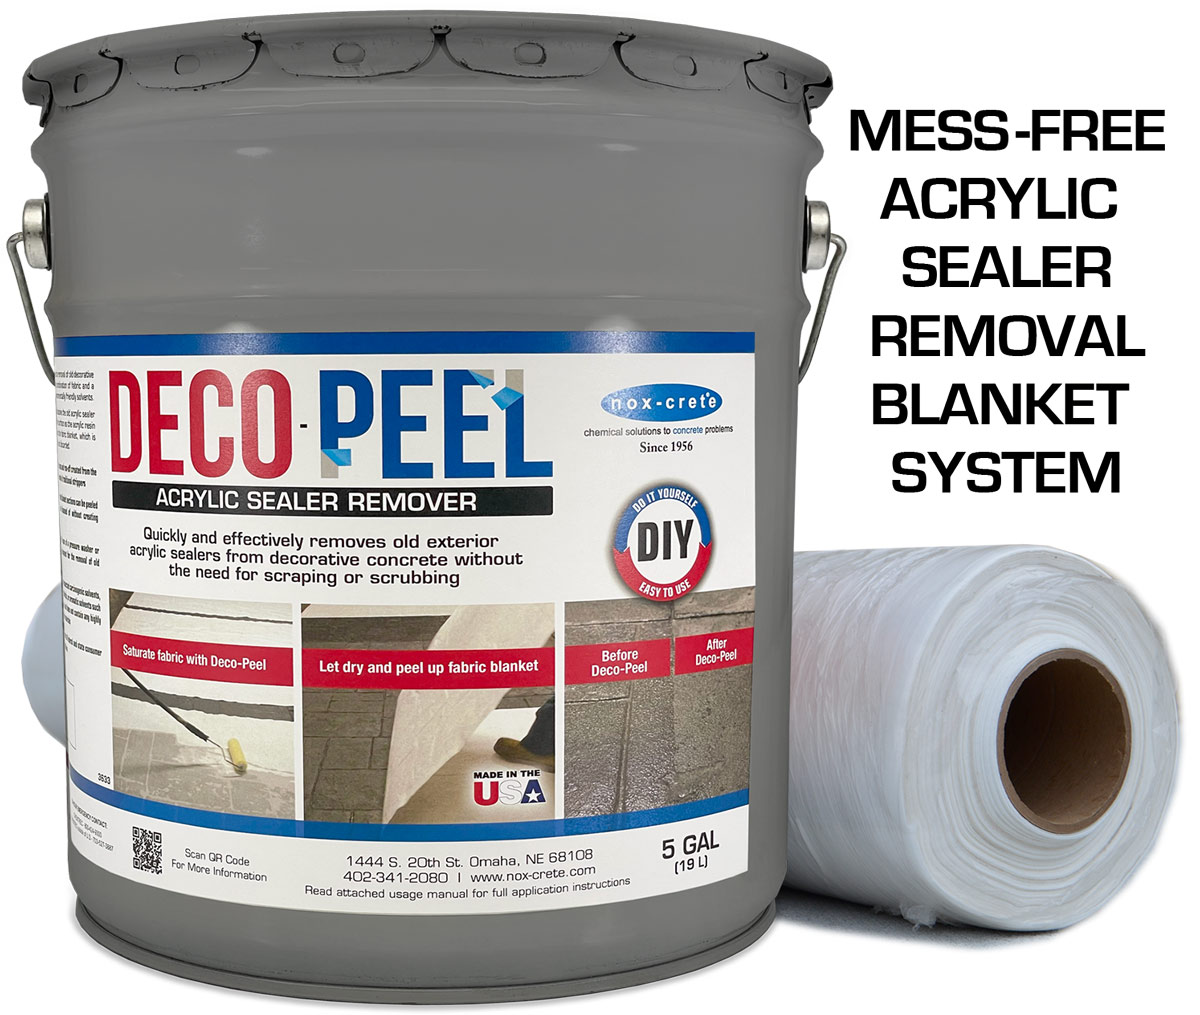 How to remove old acrylic sealer from concrete surfaces with Deco-Peel